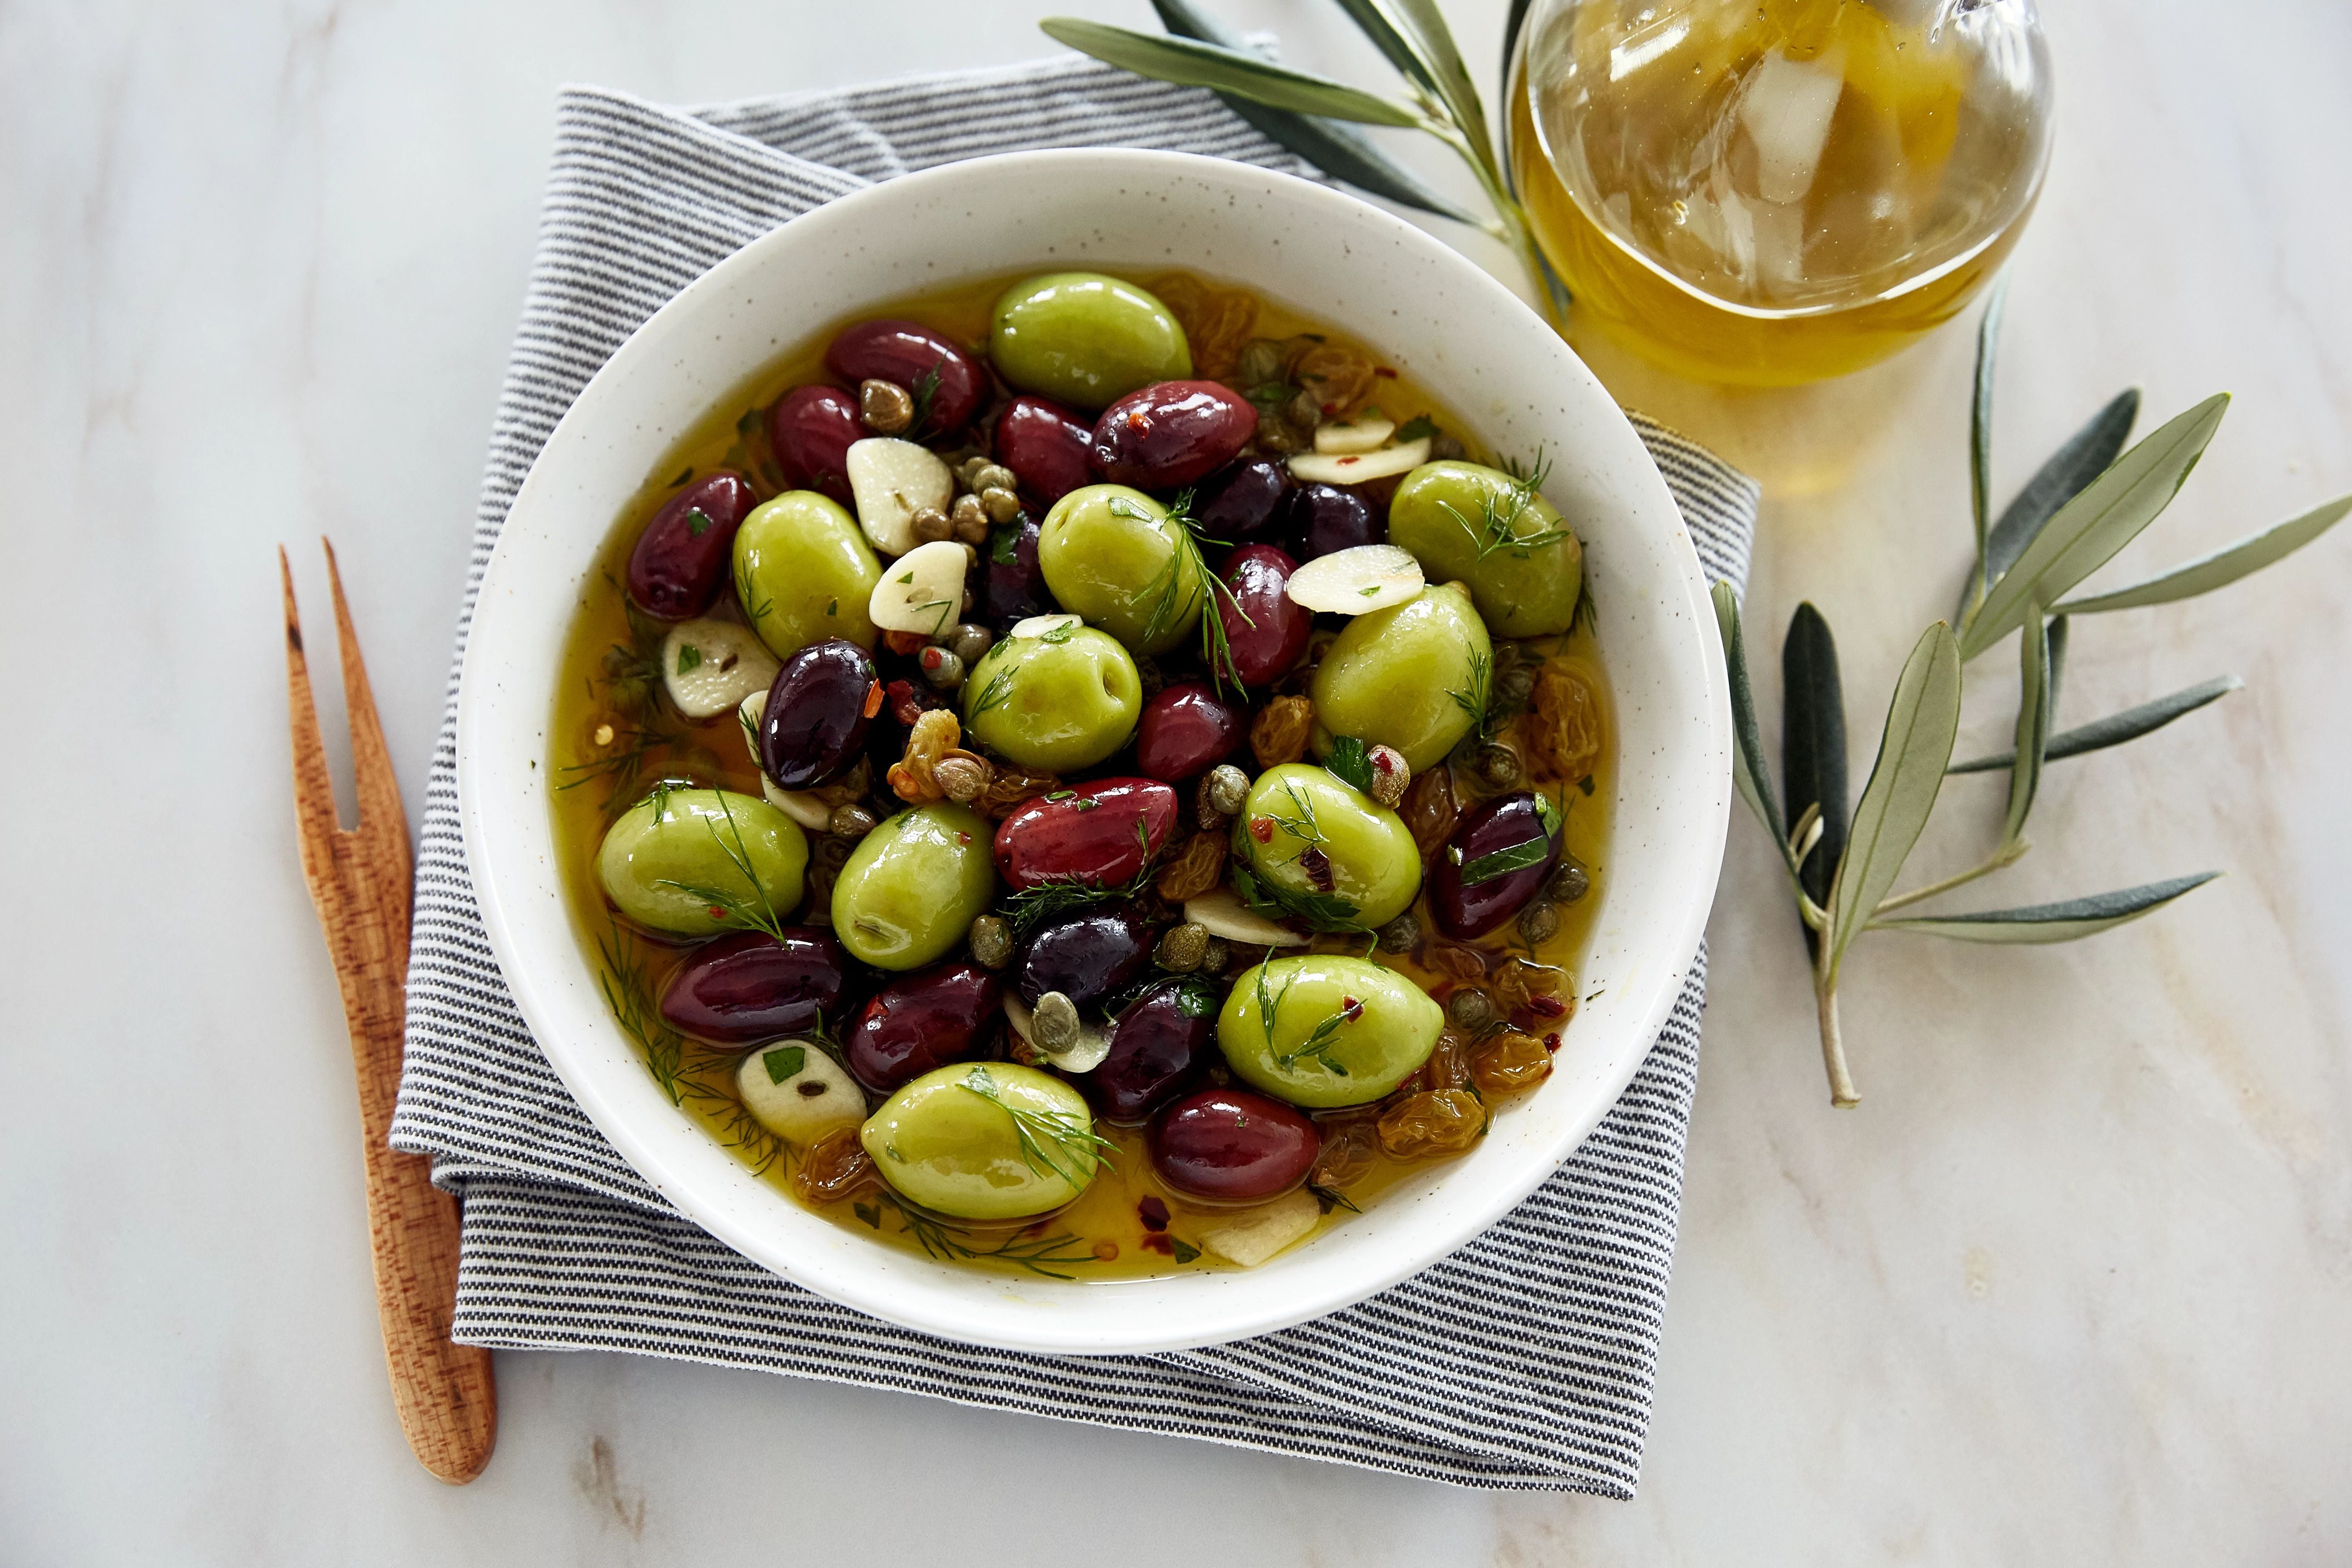 10 Types of Olives: Pitted, Stuffed, Colors & More